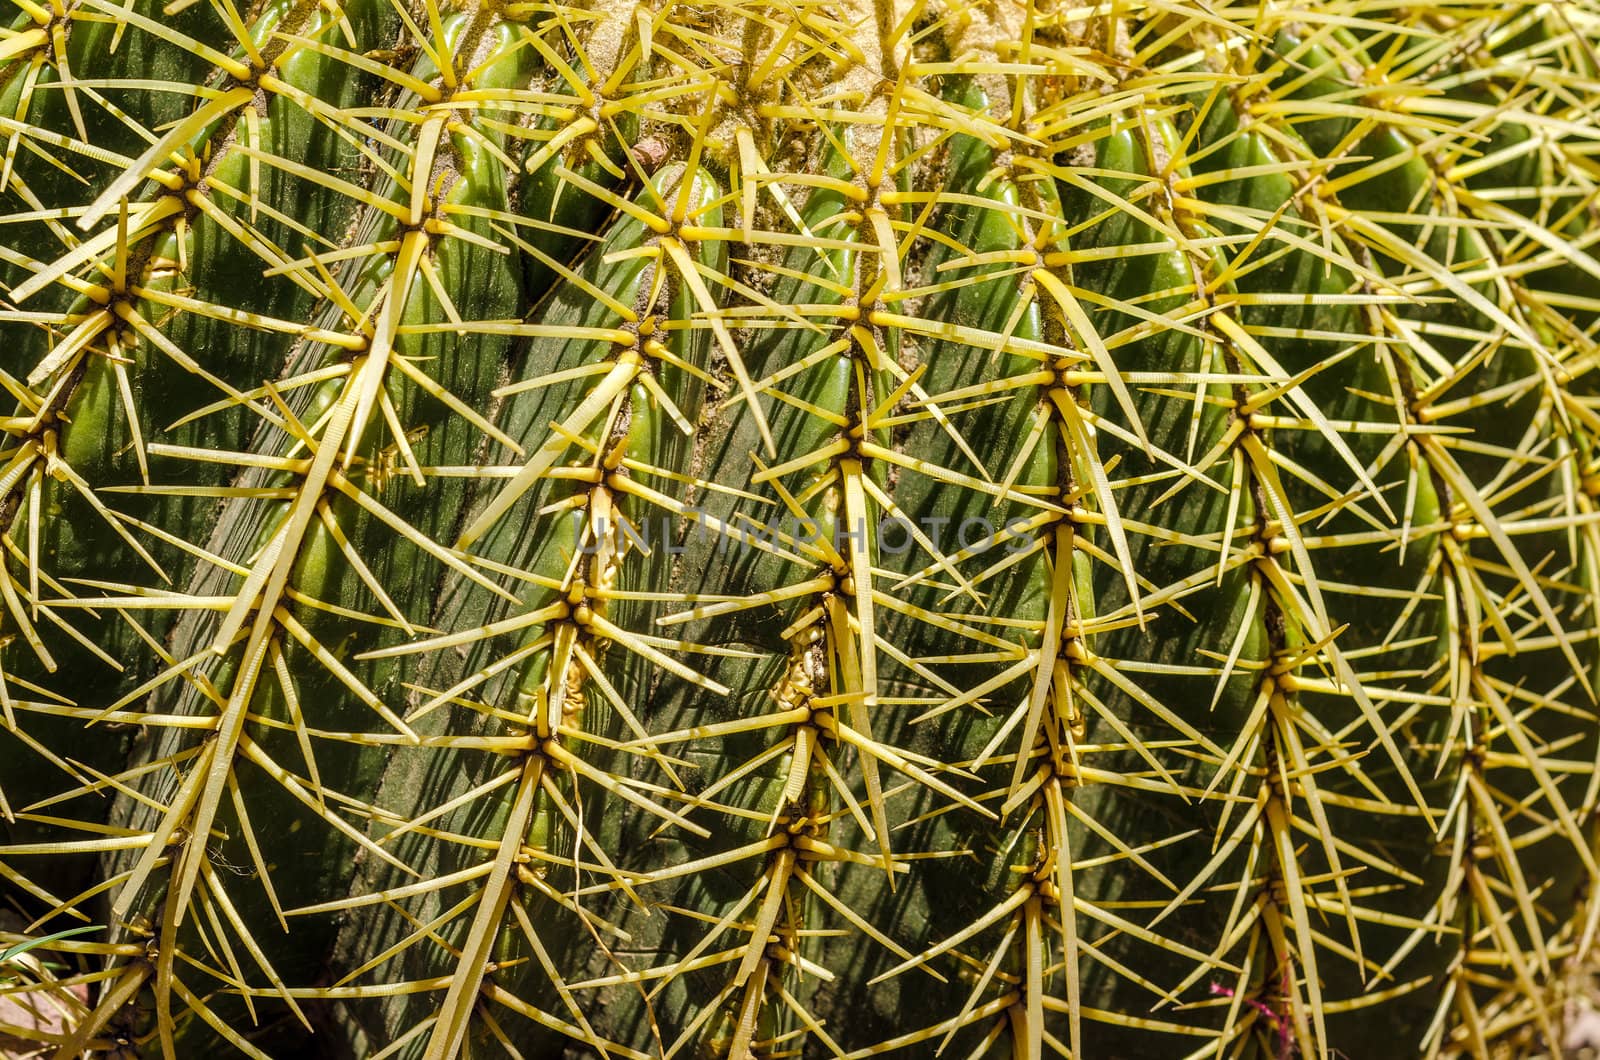 Closeup view of the prickly needles of a cactus